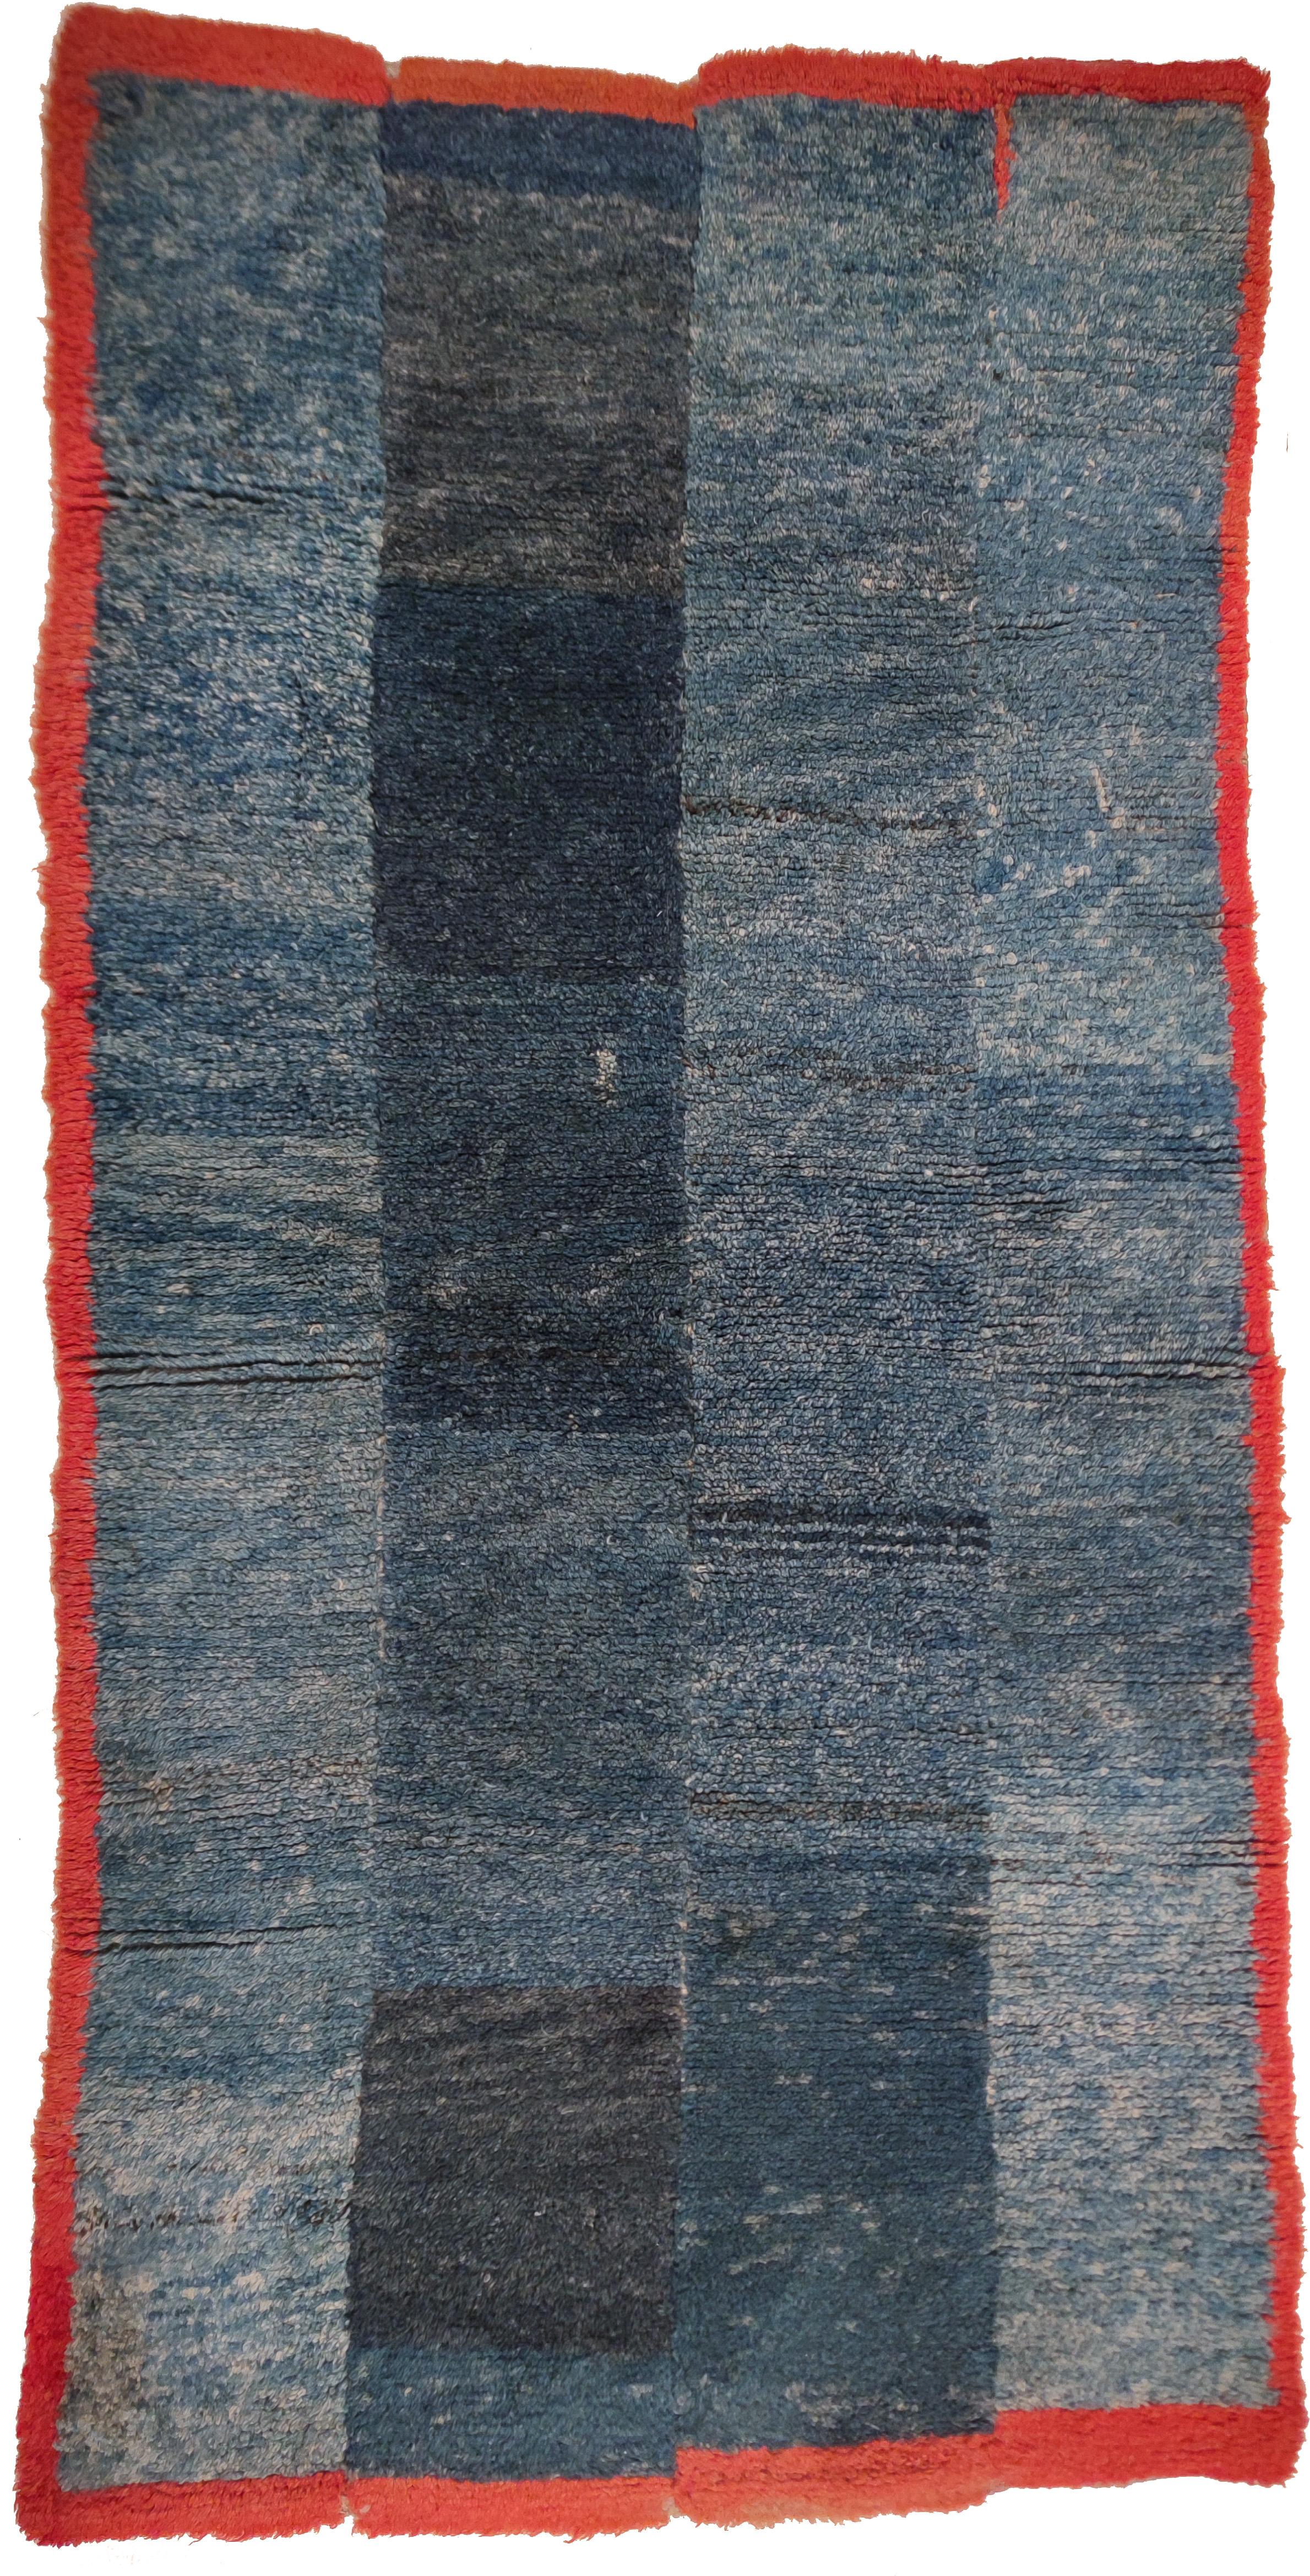 Tsukdruk rugs are possibly the most representative examples of the Tibetan nomadic weaving tradition. Woven with lanolin-rich highland wool, these come in narrow strips constructed on backstrap looms, and are part of the material culture of the